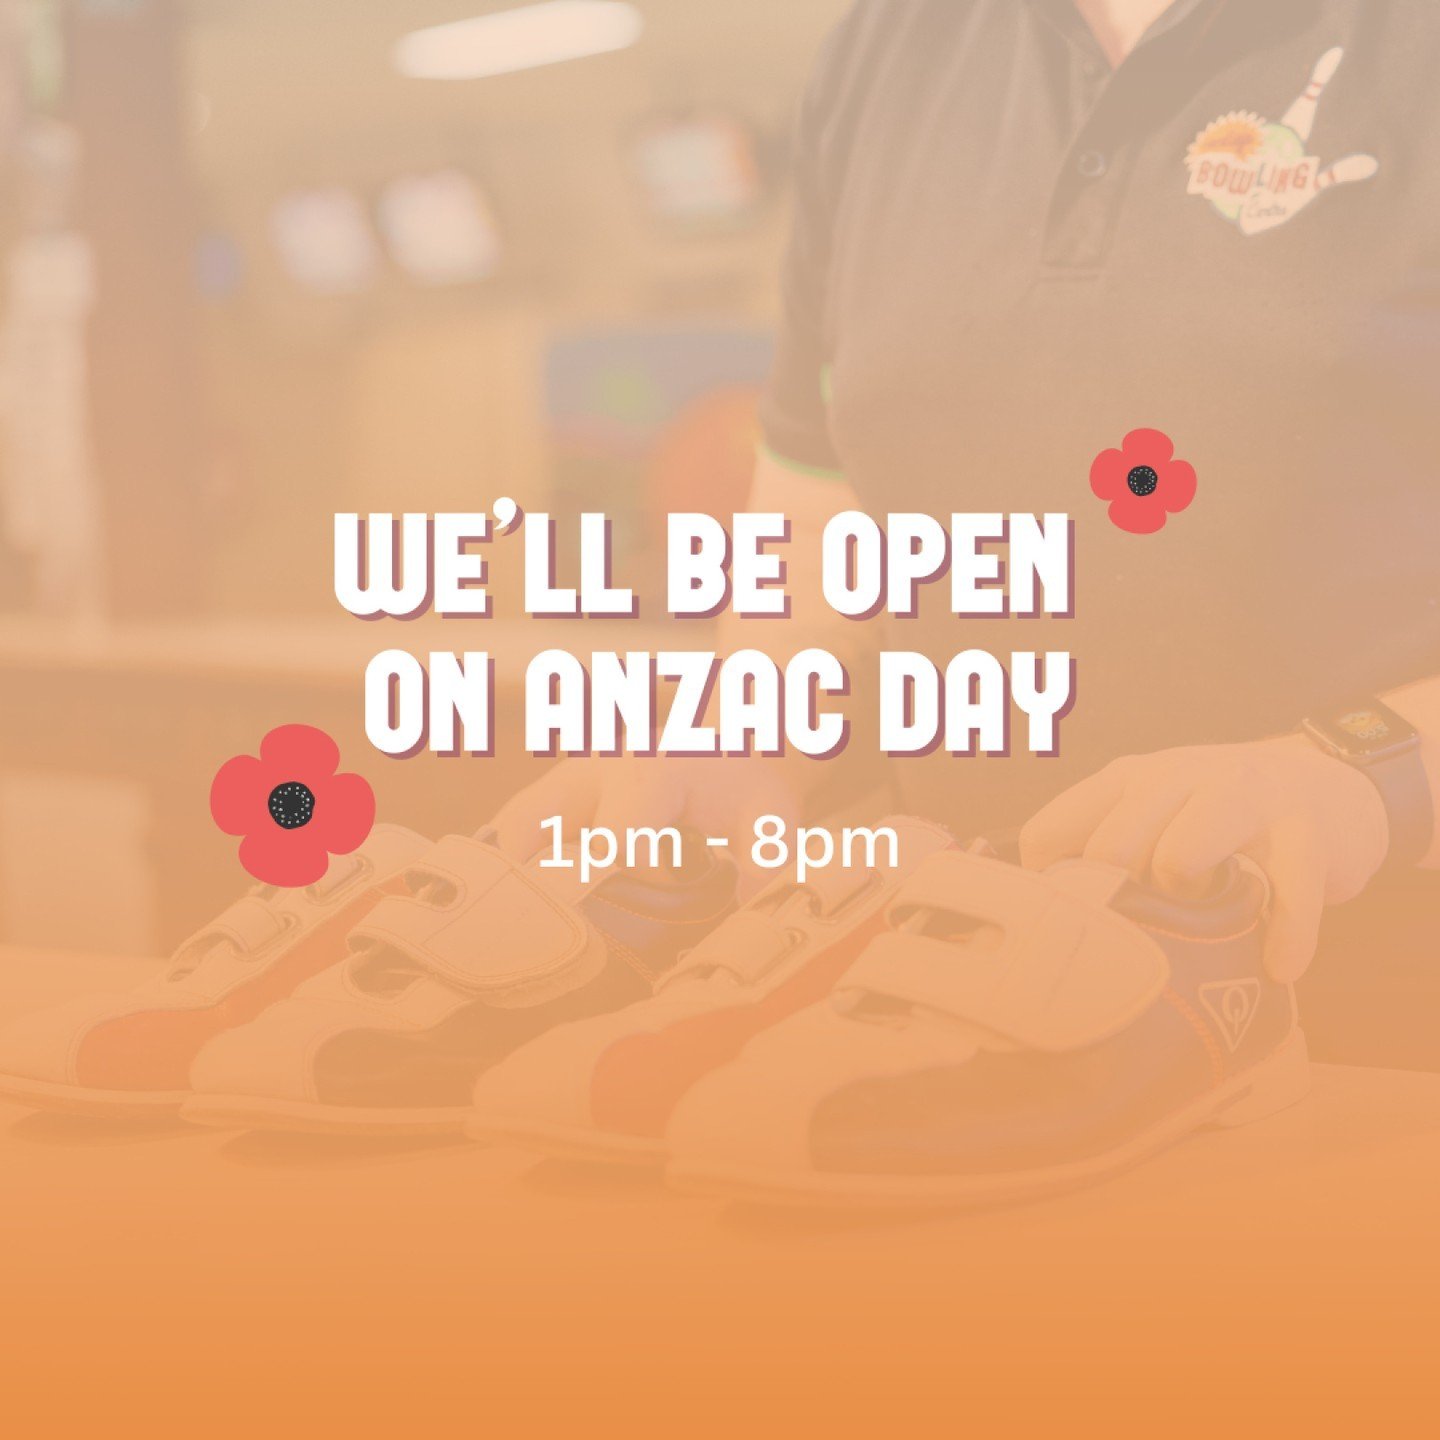 We'll be open from 1pm - 8pm on the ANAC Day public holiday (Thursday 25 April).